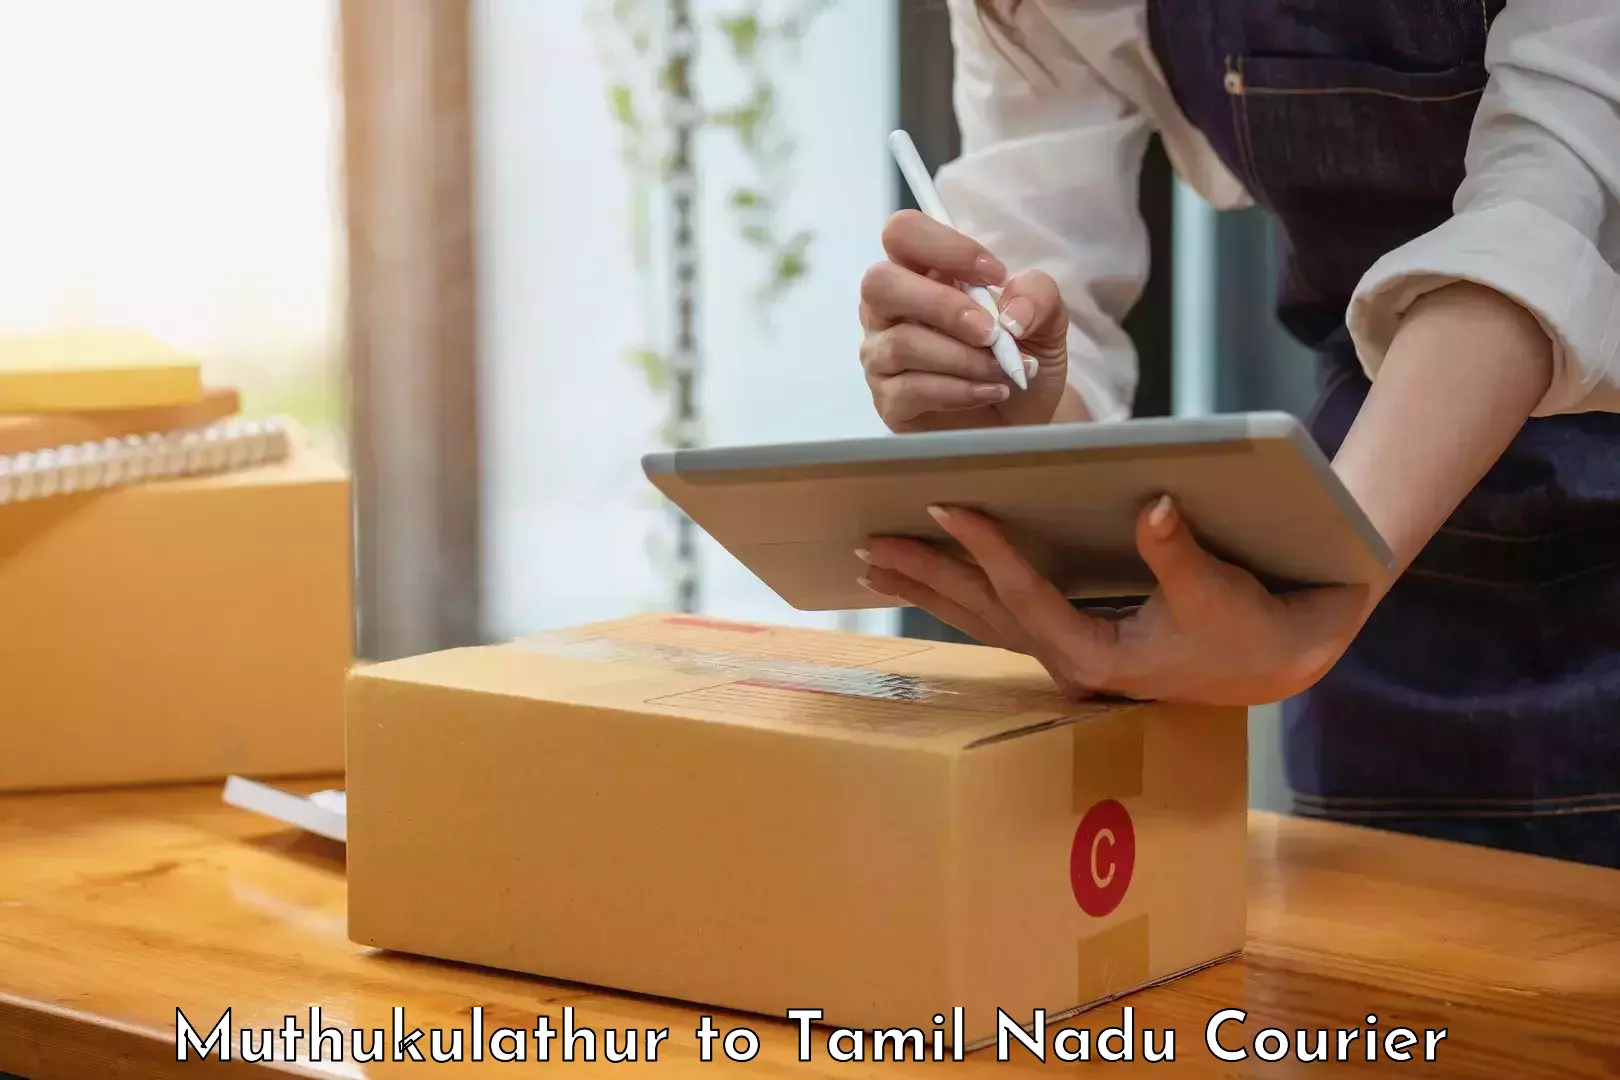 Full-service courier options Muthukulathur to Chetpet